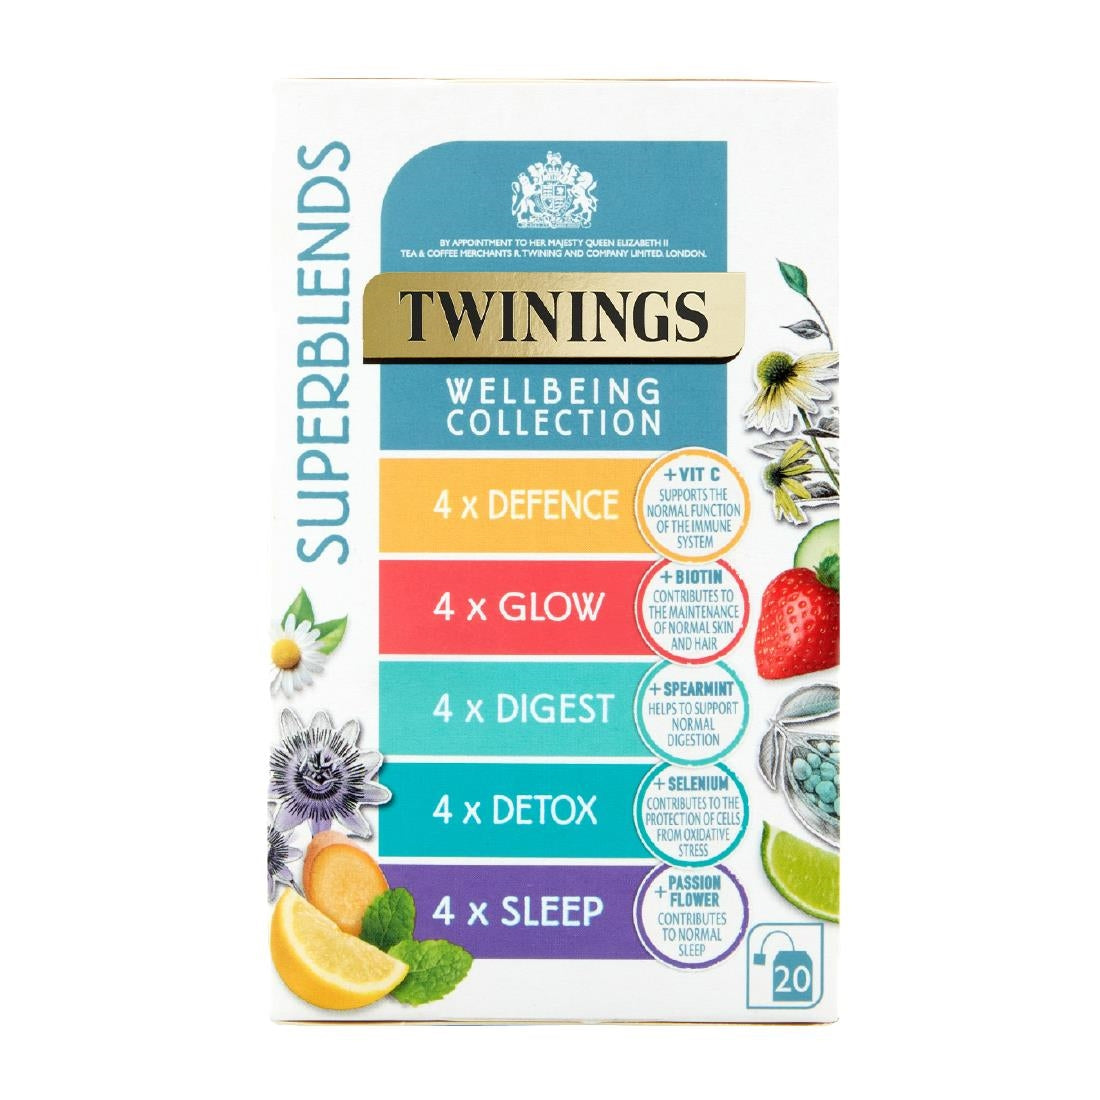 DZ471 Twinings Superblends Wellbeing Collection Tea Bags (Pack of 80)